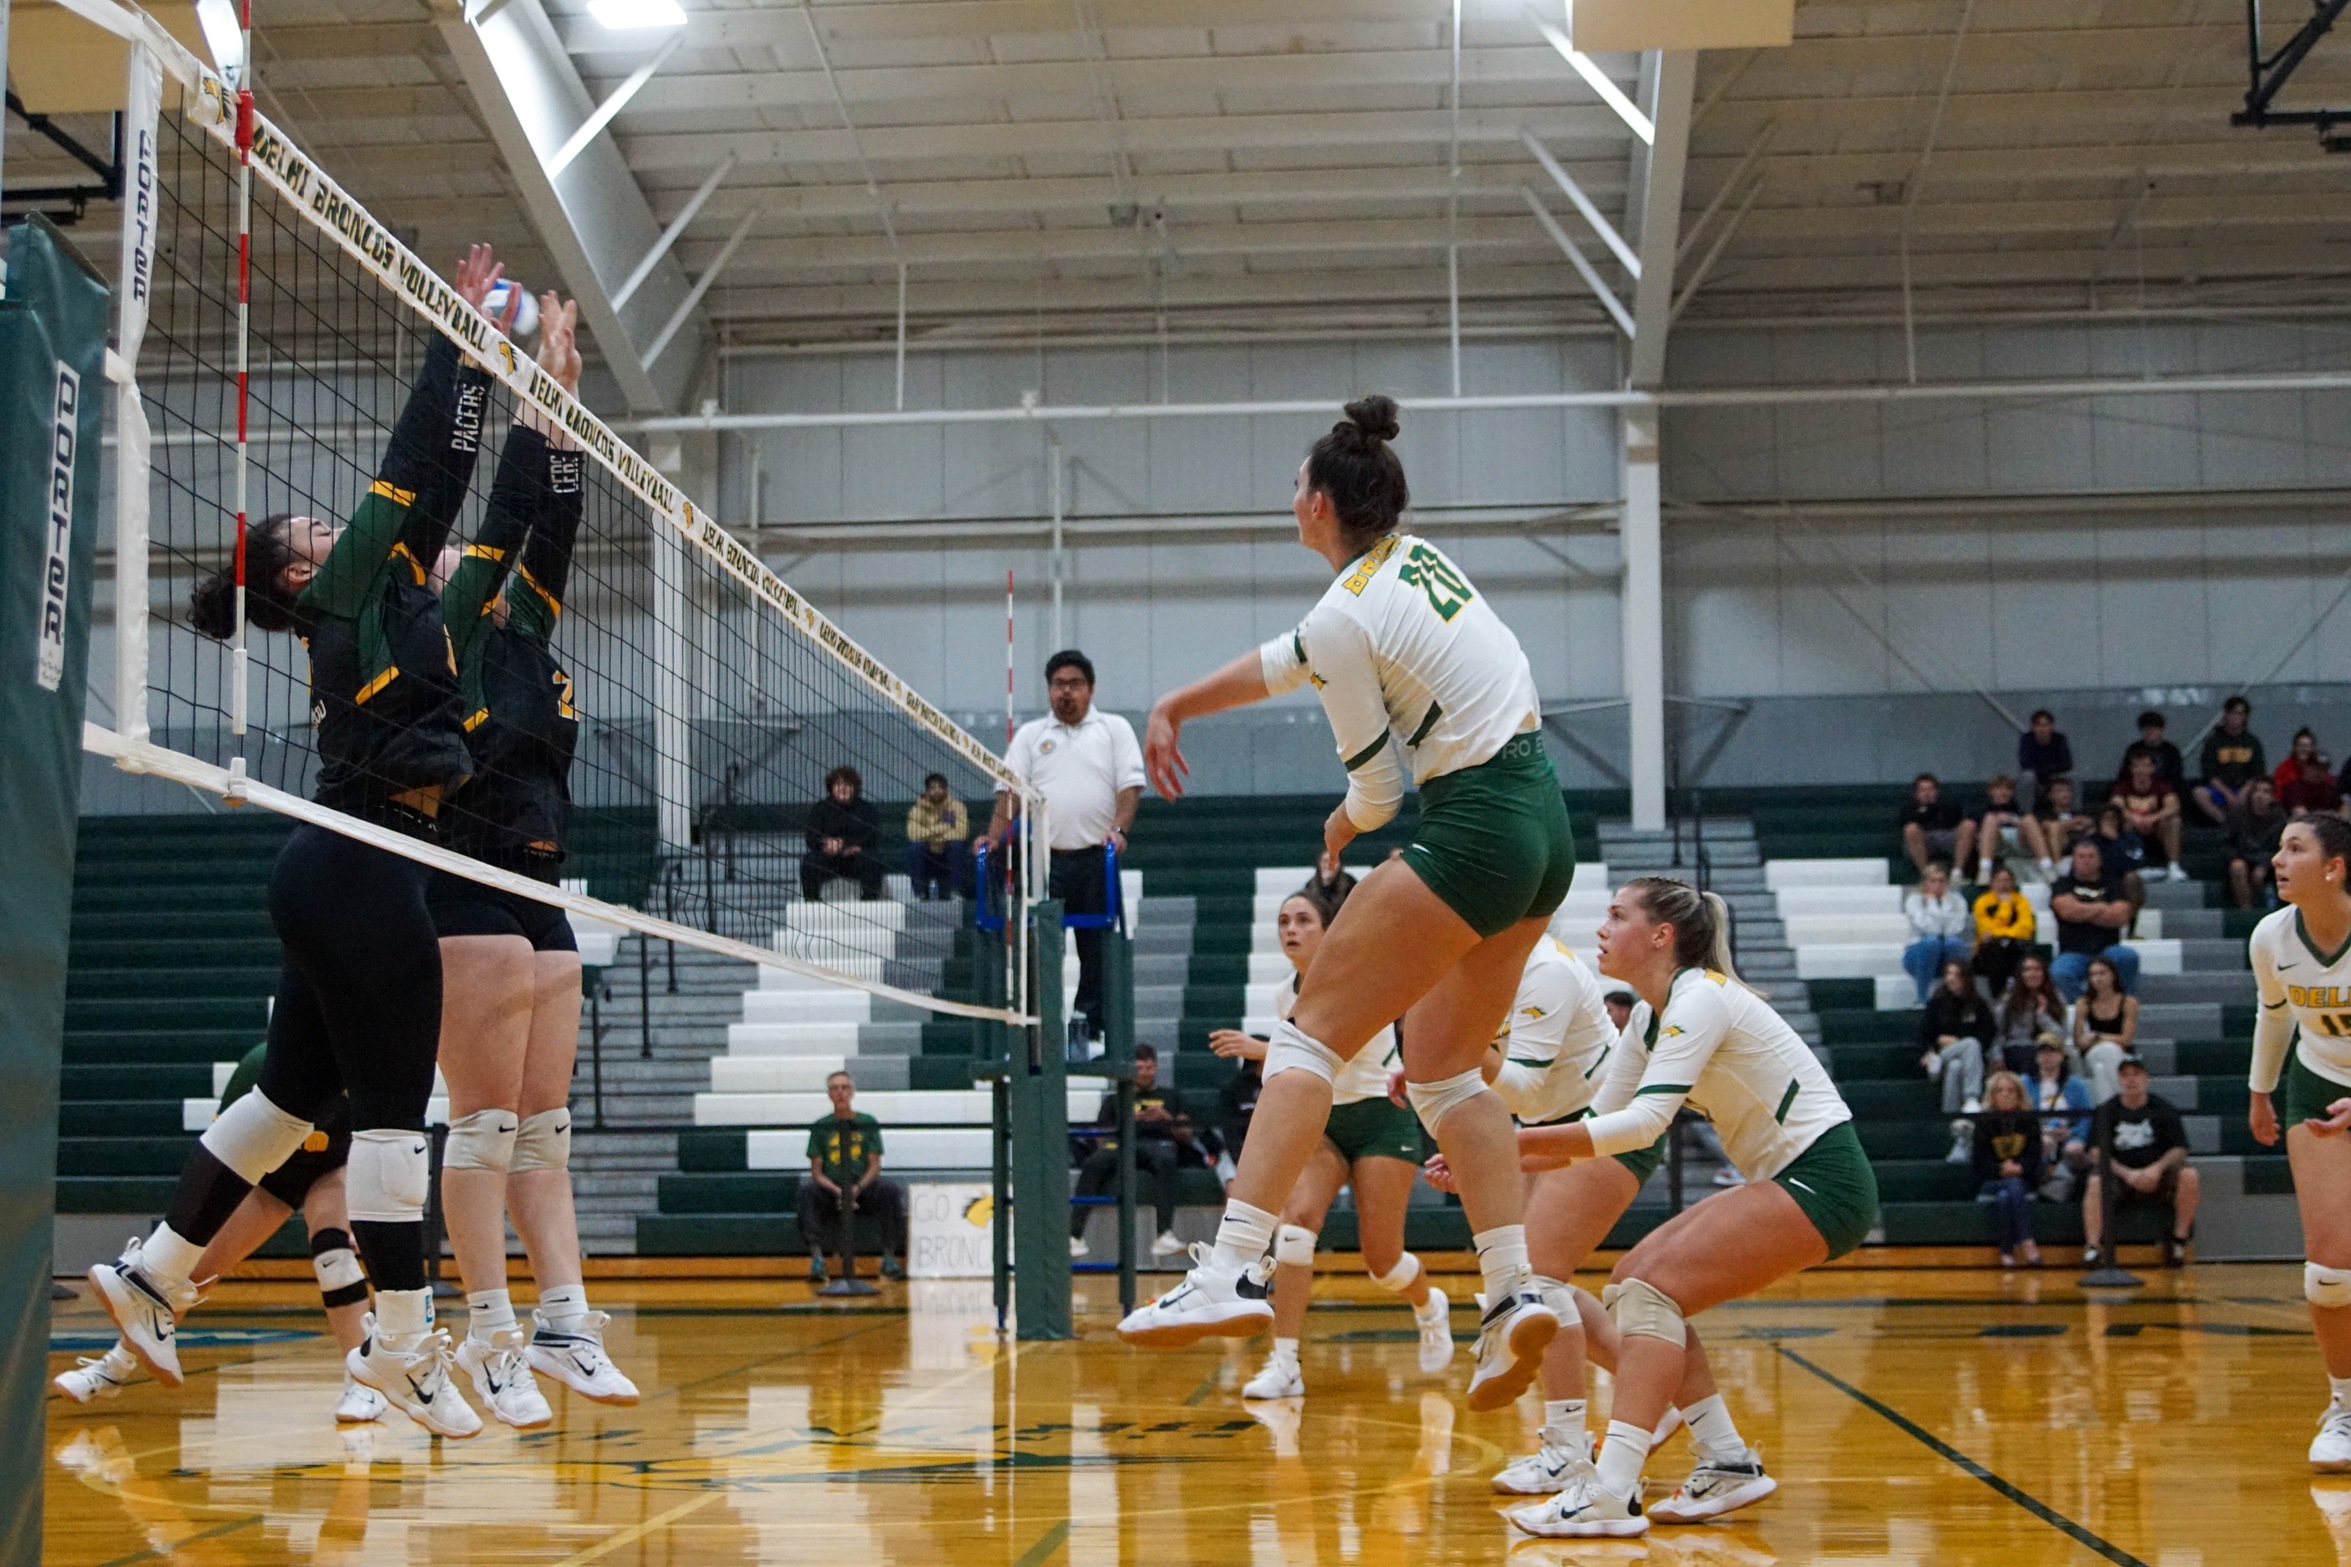 Delhi Volleyball defeats Marywood in three sets at home